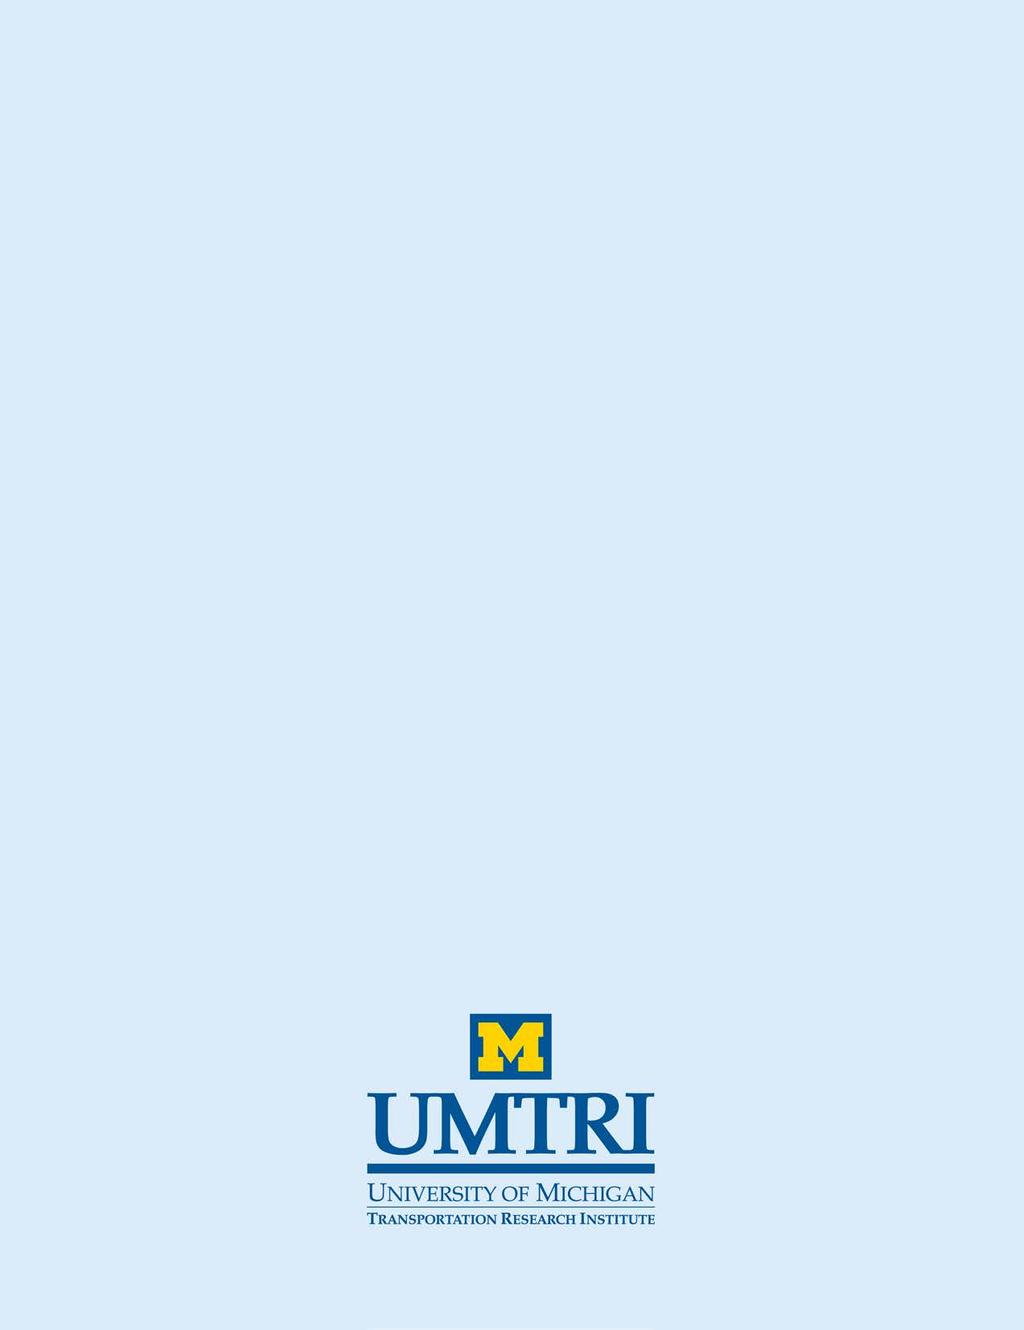 UMTRI-2012-36 DECEMBER 2012 DRIVER DISTRACTION FROM CELL PHONE USE AND